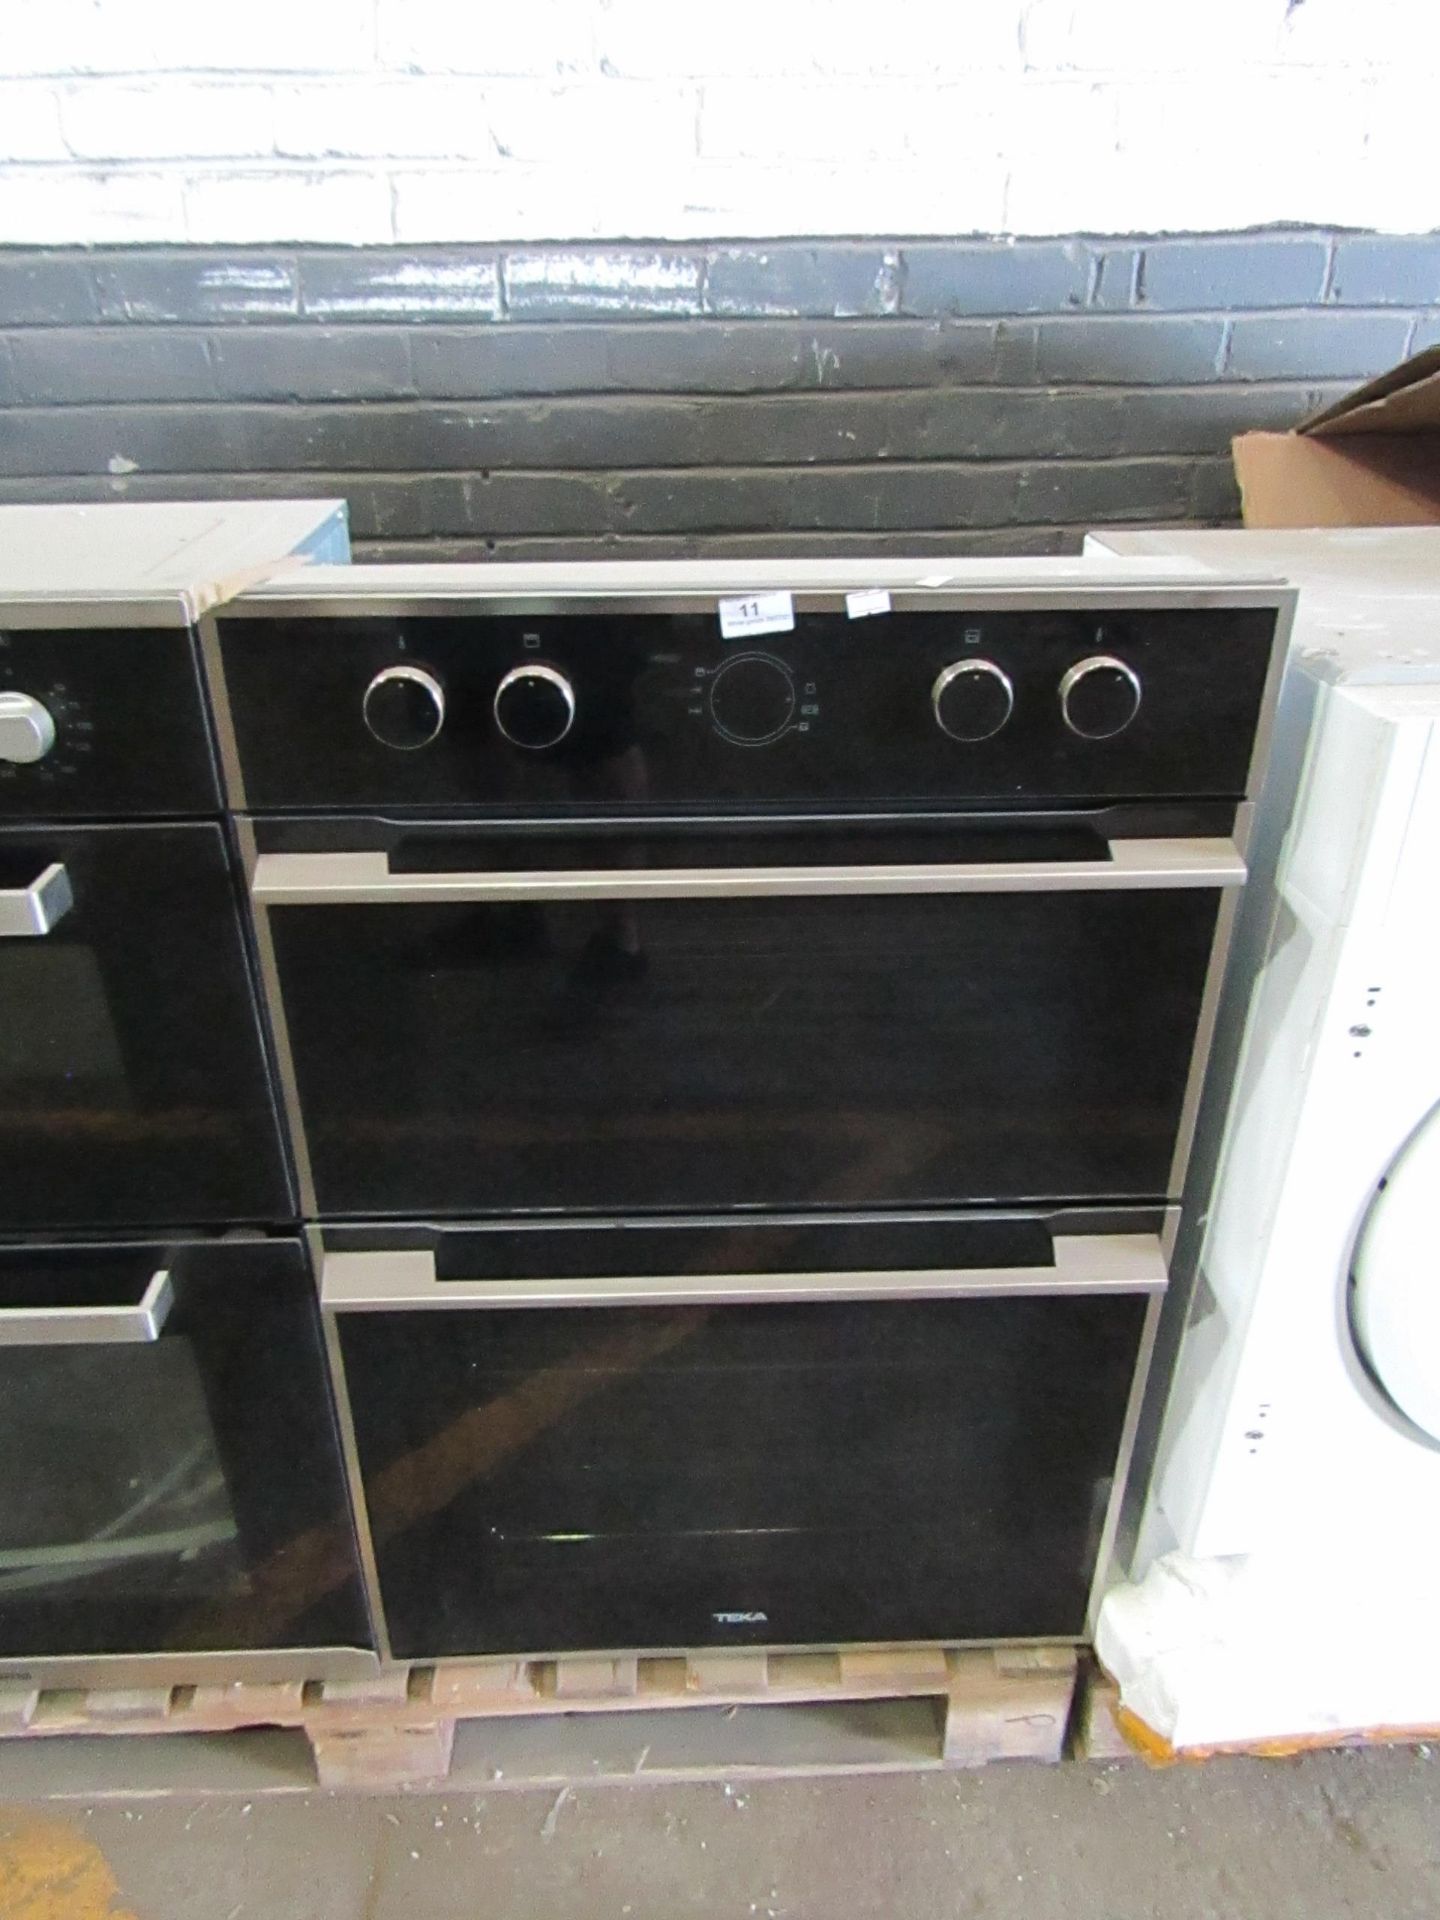 Teka Built in Double Oven - Cant test due to no wire - No major damage Visible - Has Metal shelves